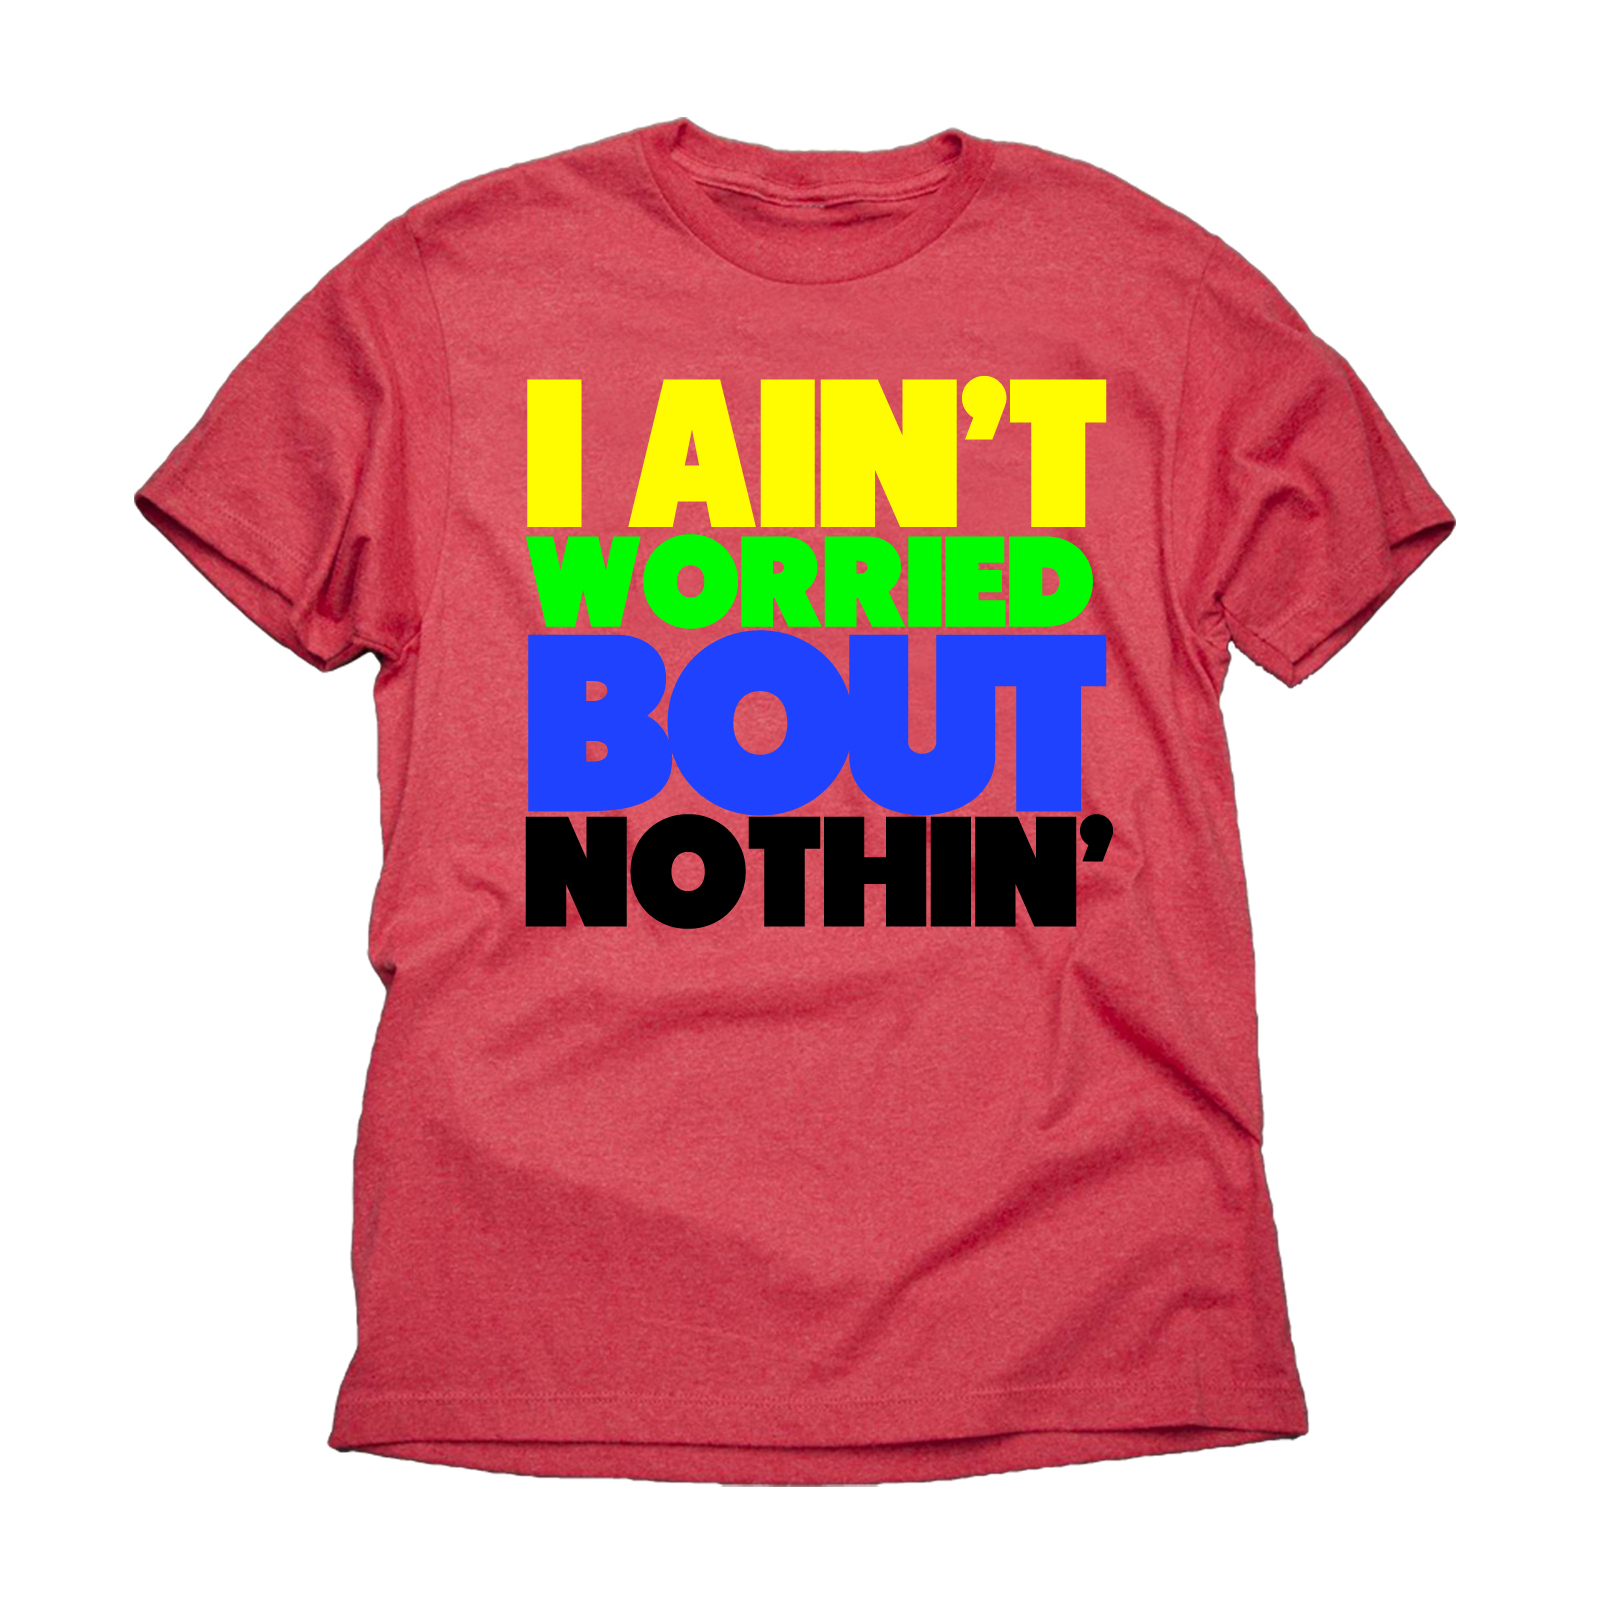 Route 66 Boy's Graphic T-Shirt - I Ain't Worried Bout Nothin'